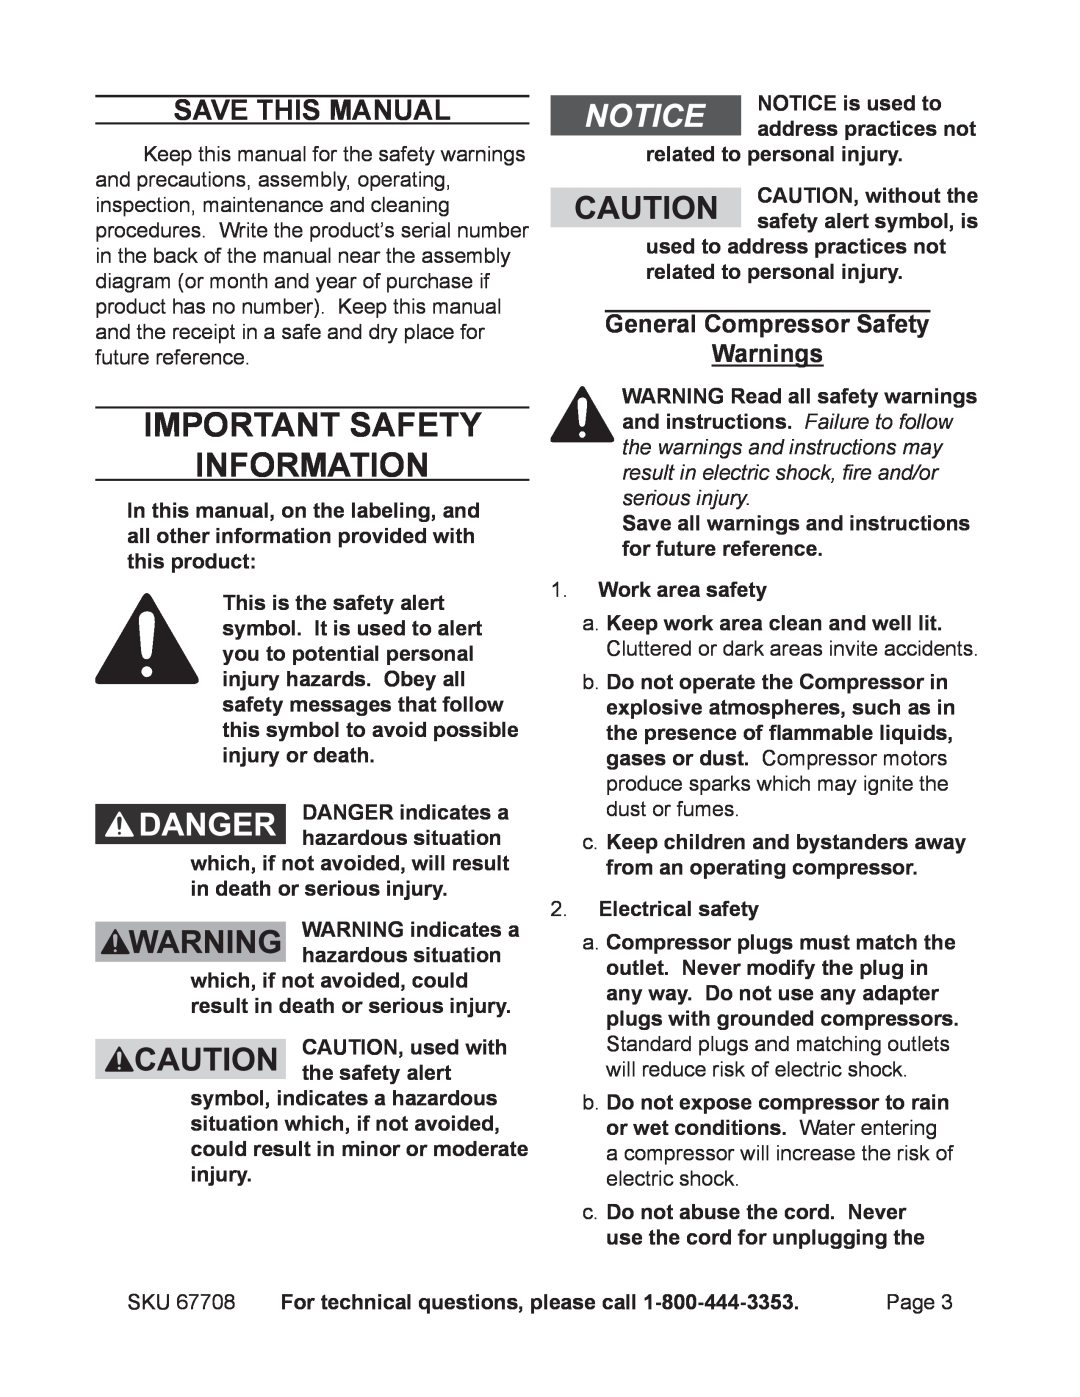 Harbor Freight Tools 67708 Important SAFETY Information, Save This Manual, CAUTION, used with the safety alert 